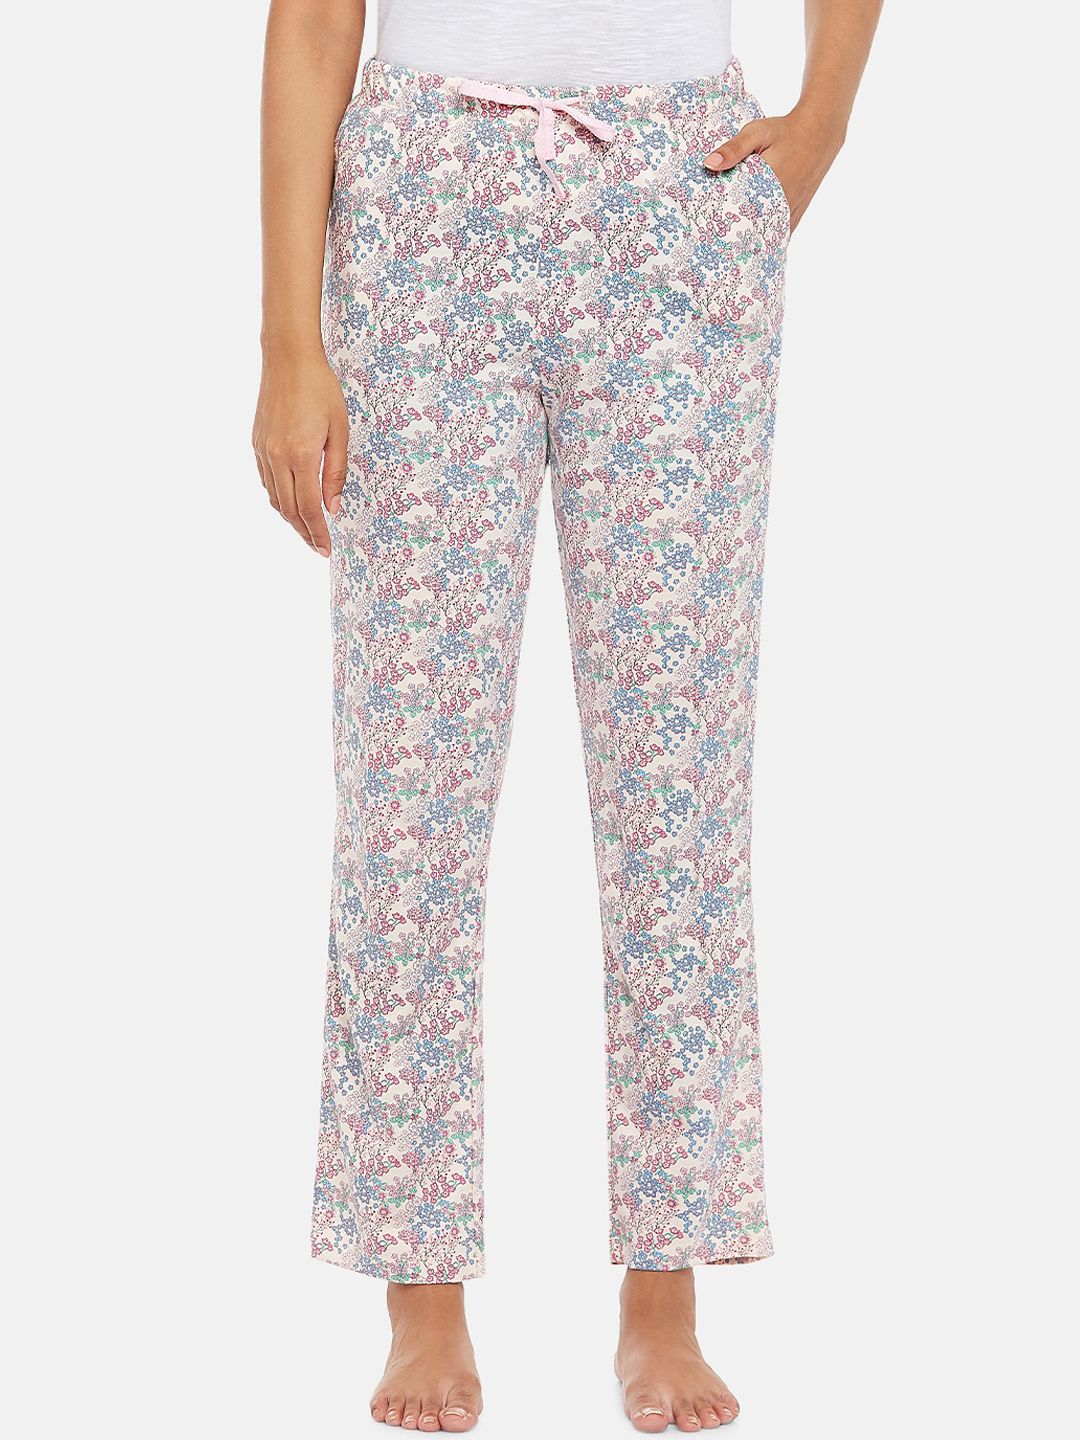 Dreamz by Pantaloons Women Off White Printed Lounge Pants Price in India